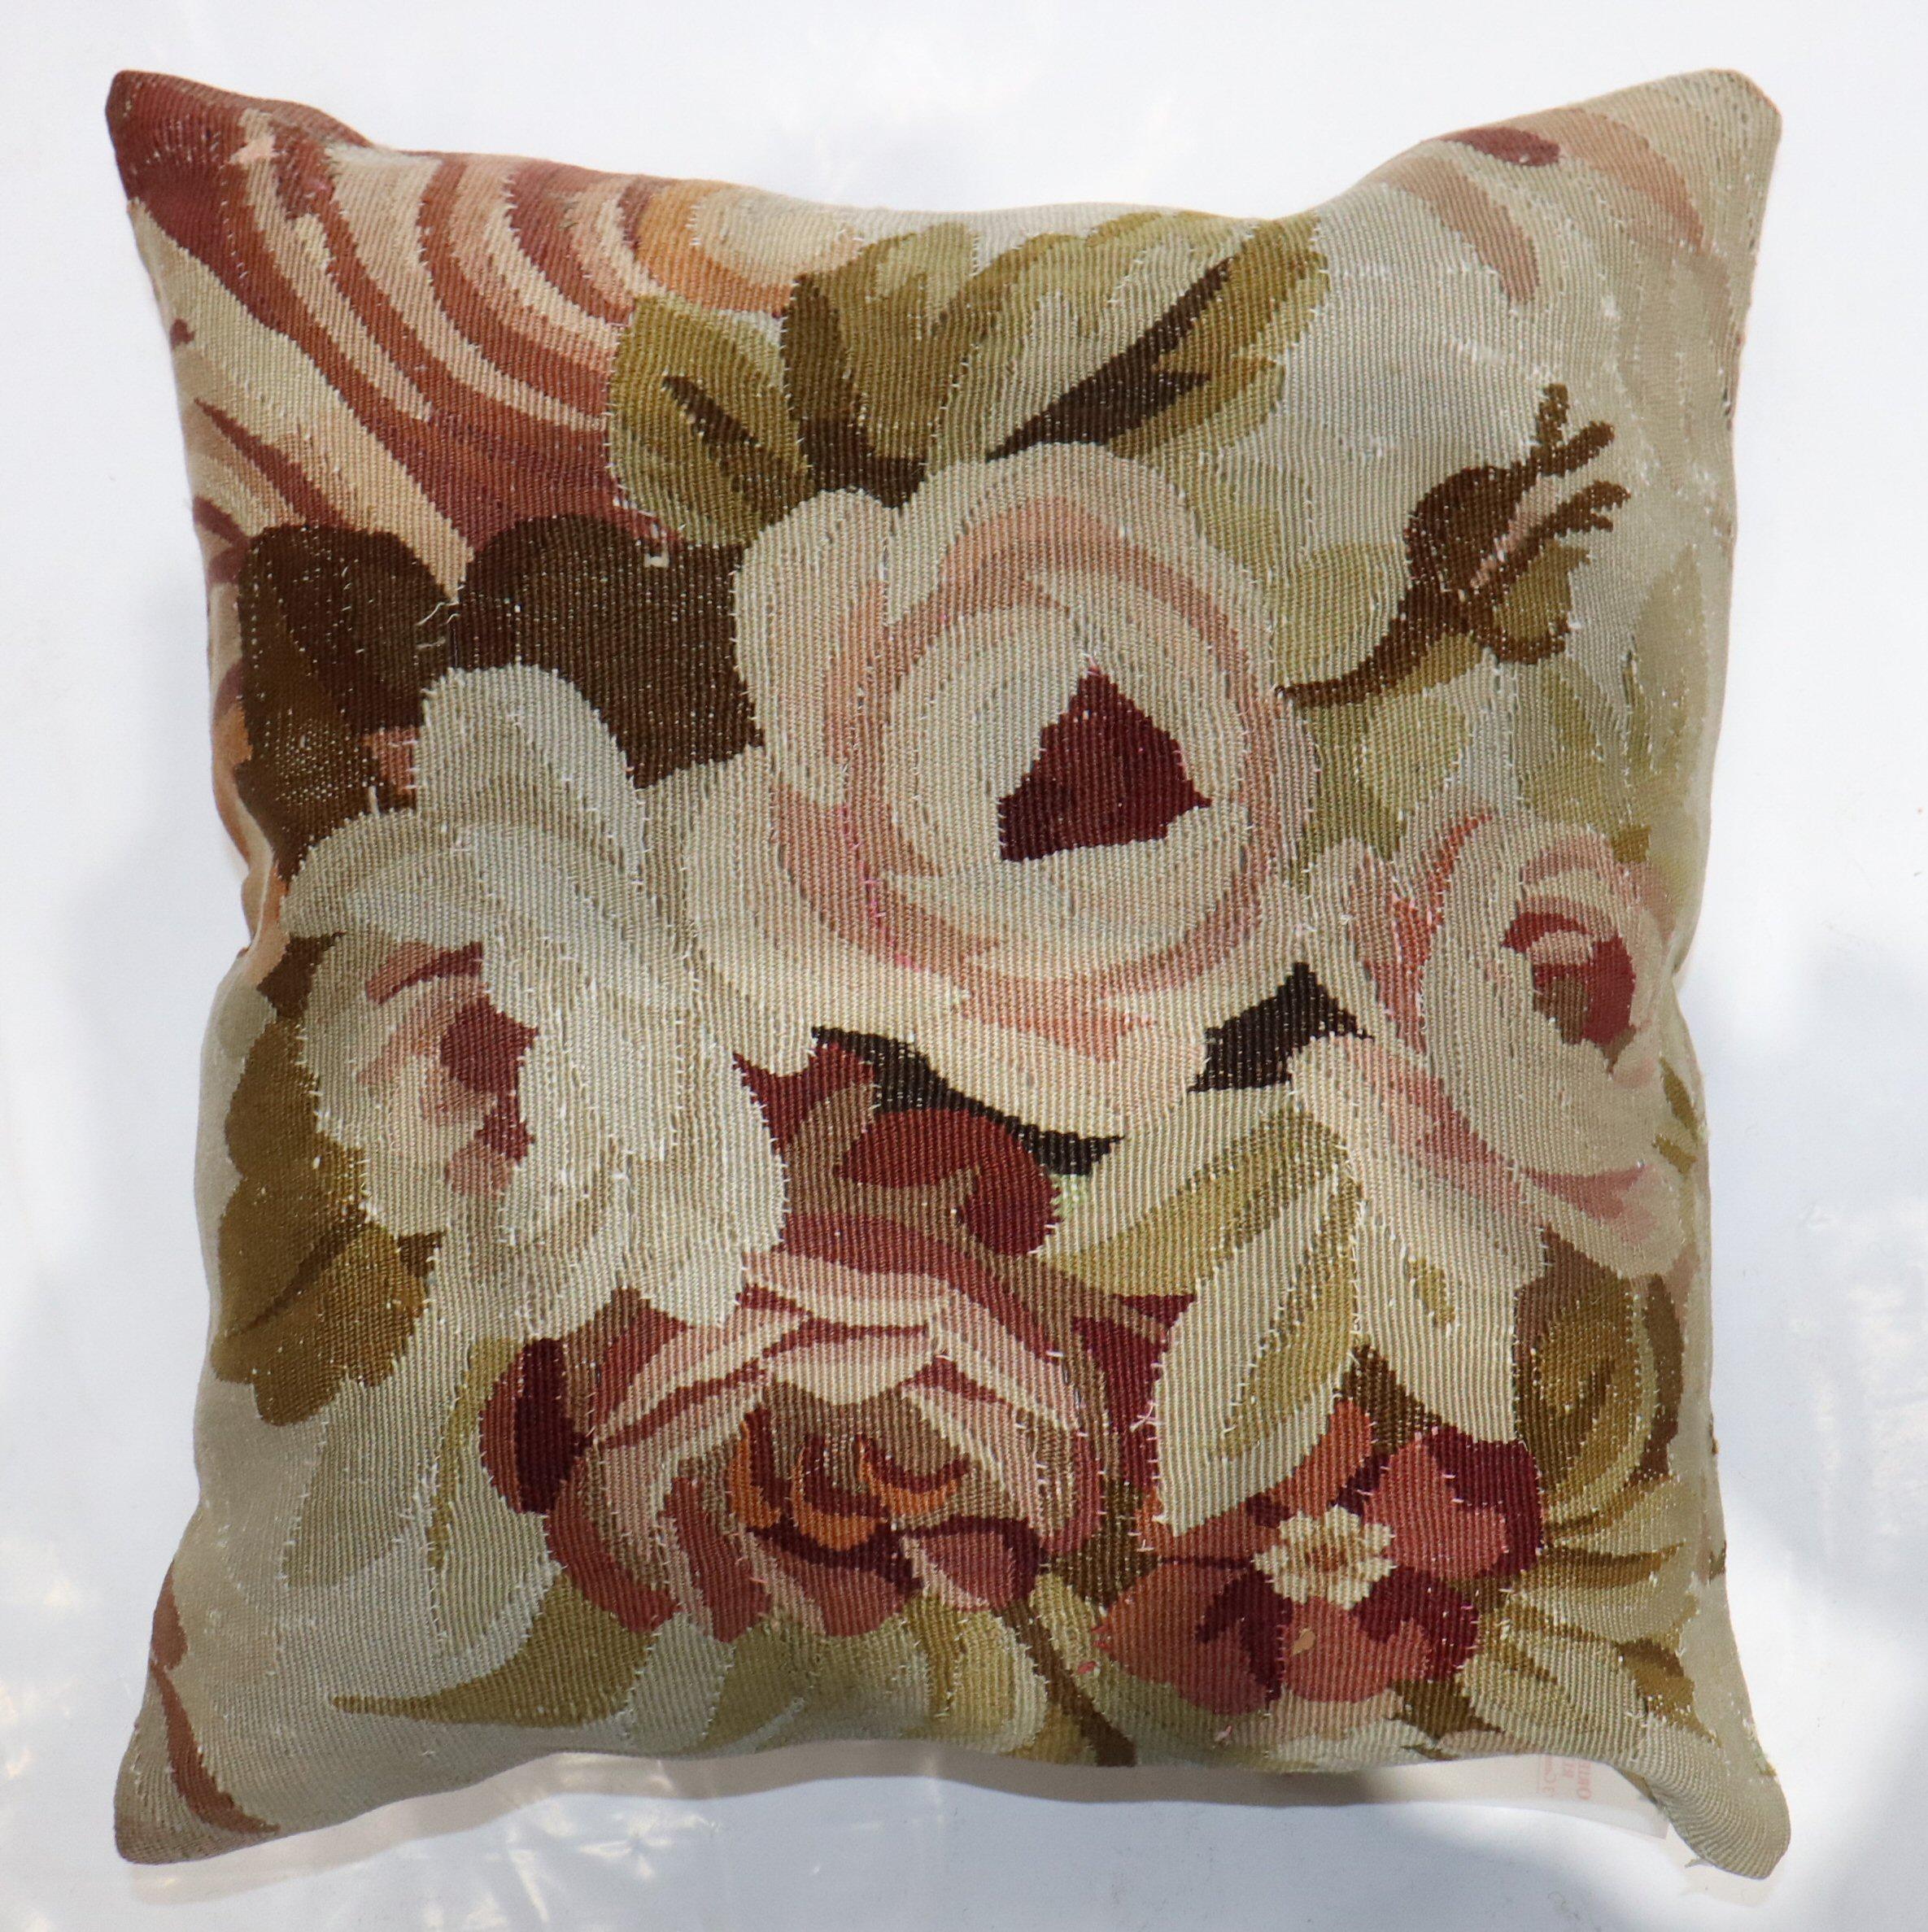 Authentic stand-alone pillow made from a 19th century French Aubusson rug

Measures: 18